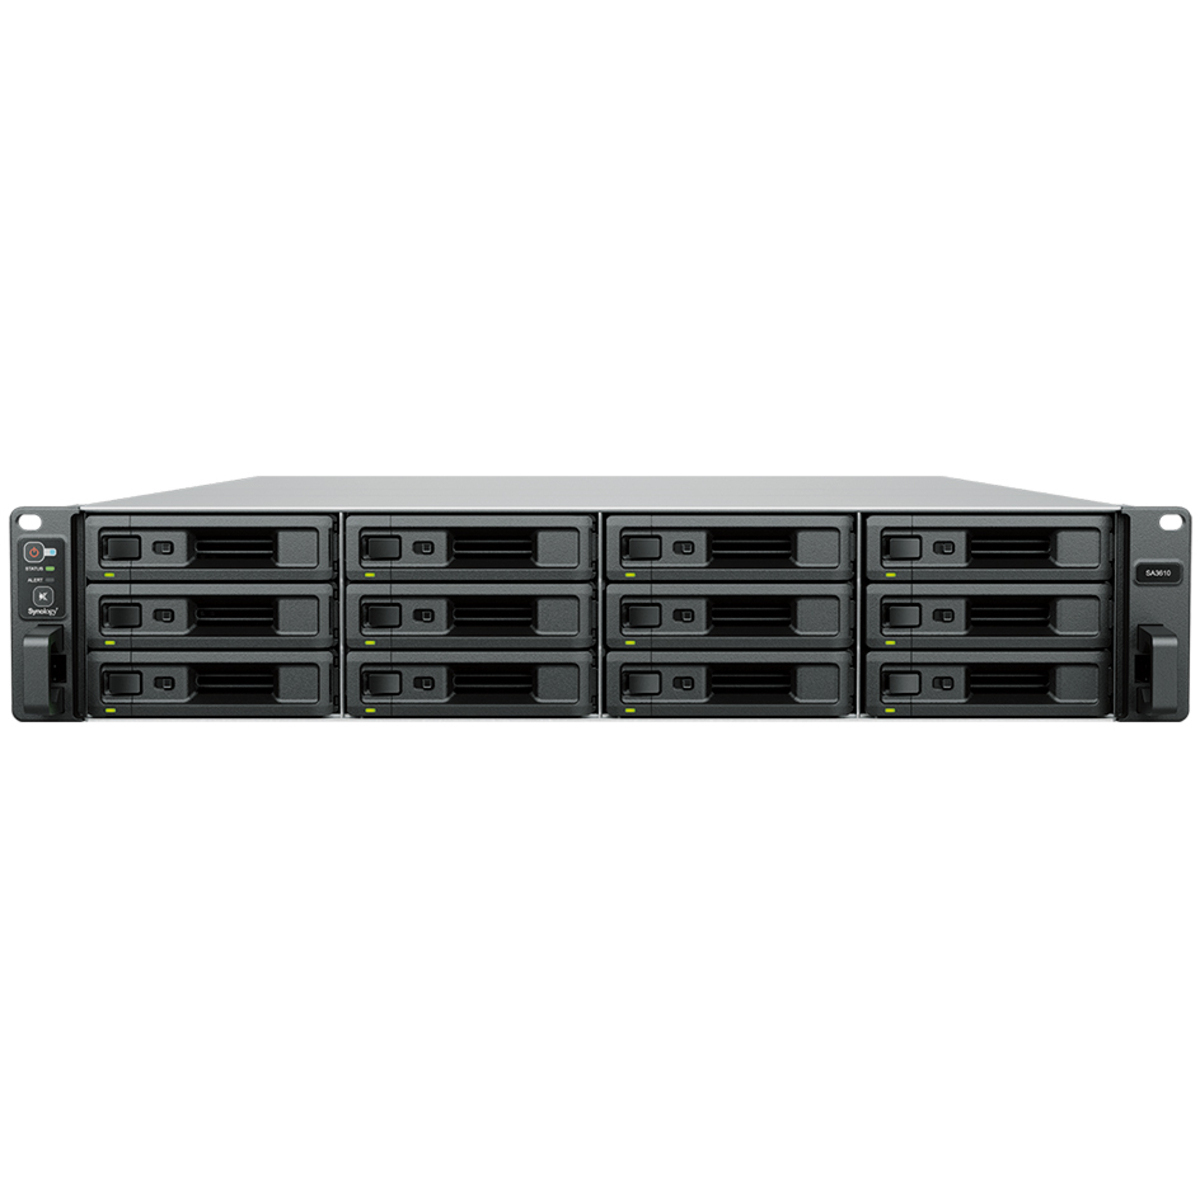 Synology RackStation SA3610 100tb 12-Bay RackMount Large Business / Enterprise NAS - Network Attached Storage Device 10x10tb Seagate EXOS X18 ST10000NM018G 3.5 7200rpm SATA 6Gb/s HDD ENTERPRISE Class Drives Installed - Burn-In Tested RackStation SA3610